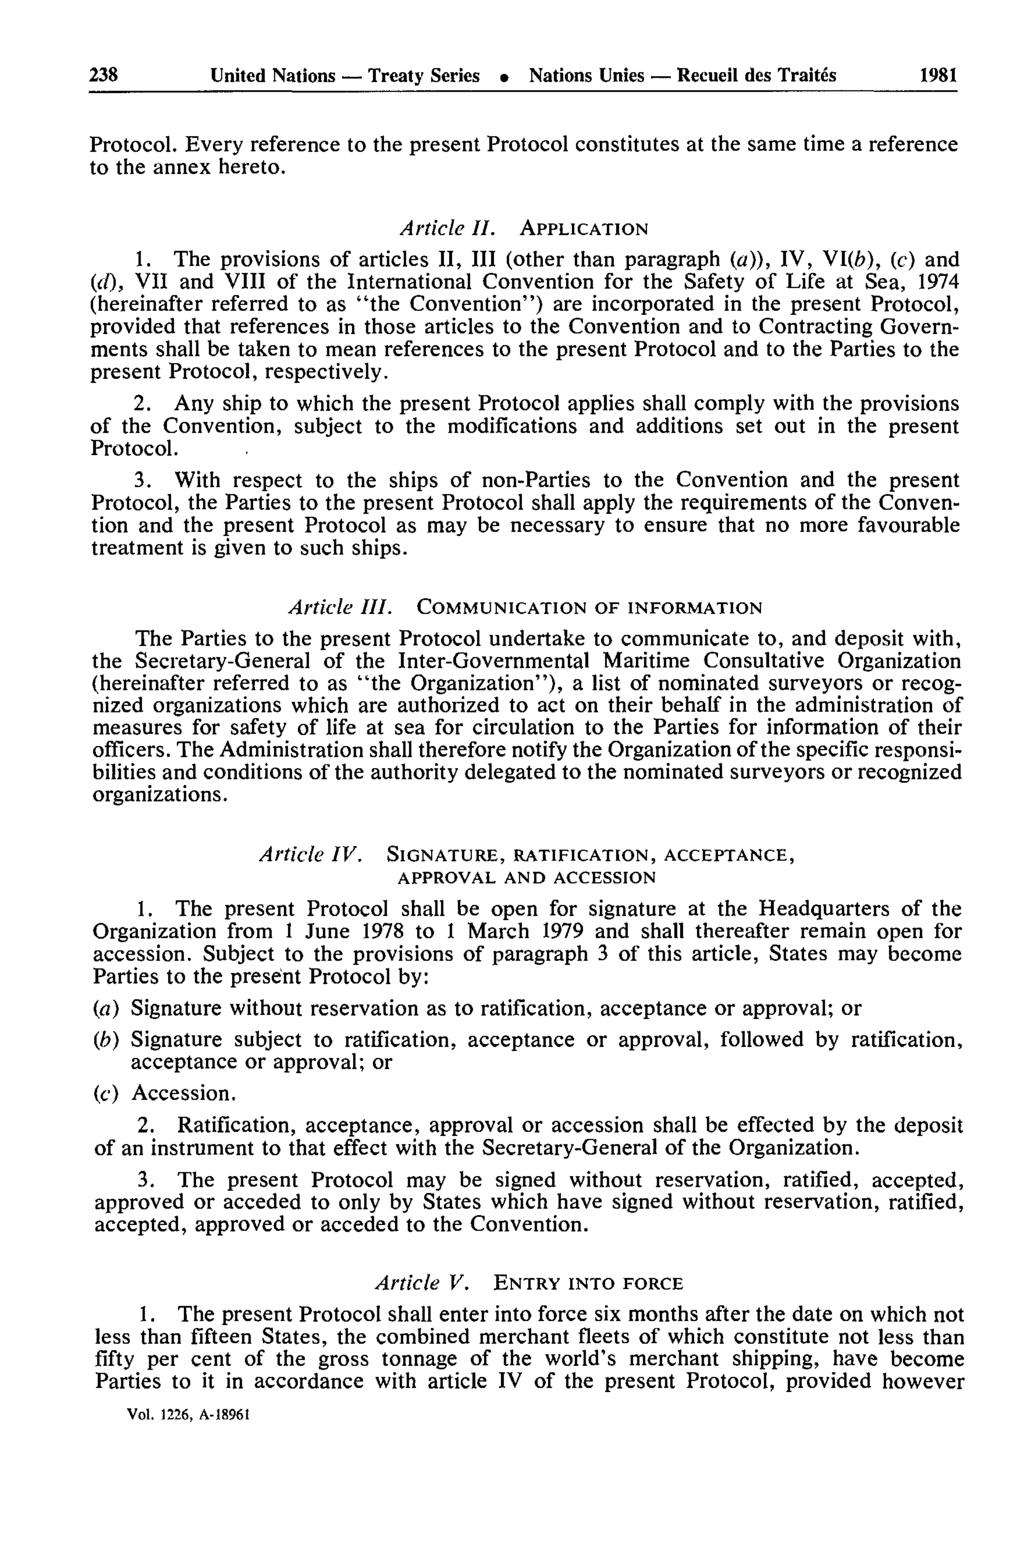 238 United Nations Treaty Series Nations Unies Recueil des Traités 1981 Protocol. Every reference to the present Protocol constitutes at the same time a reference to the annex hereto. Article II.